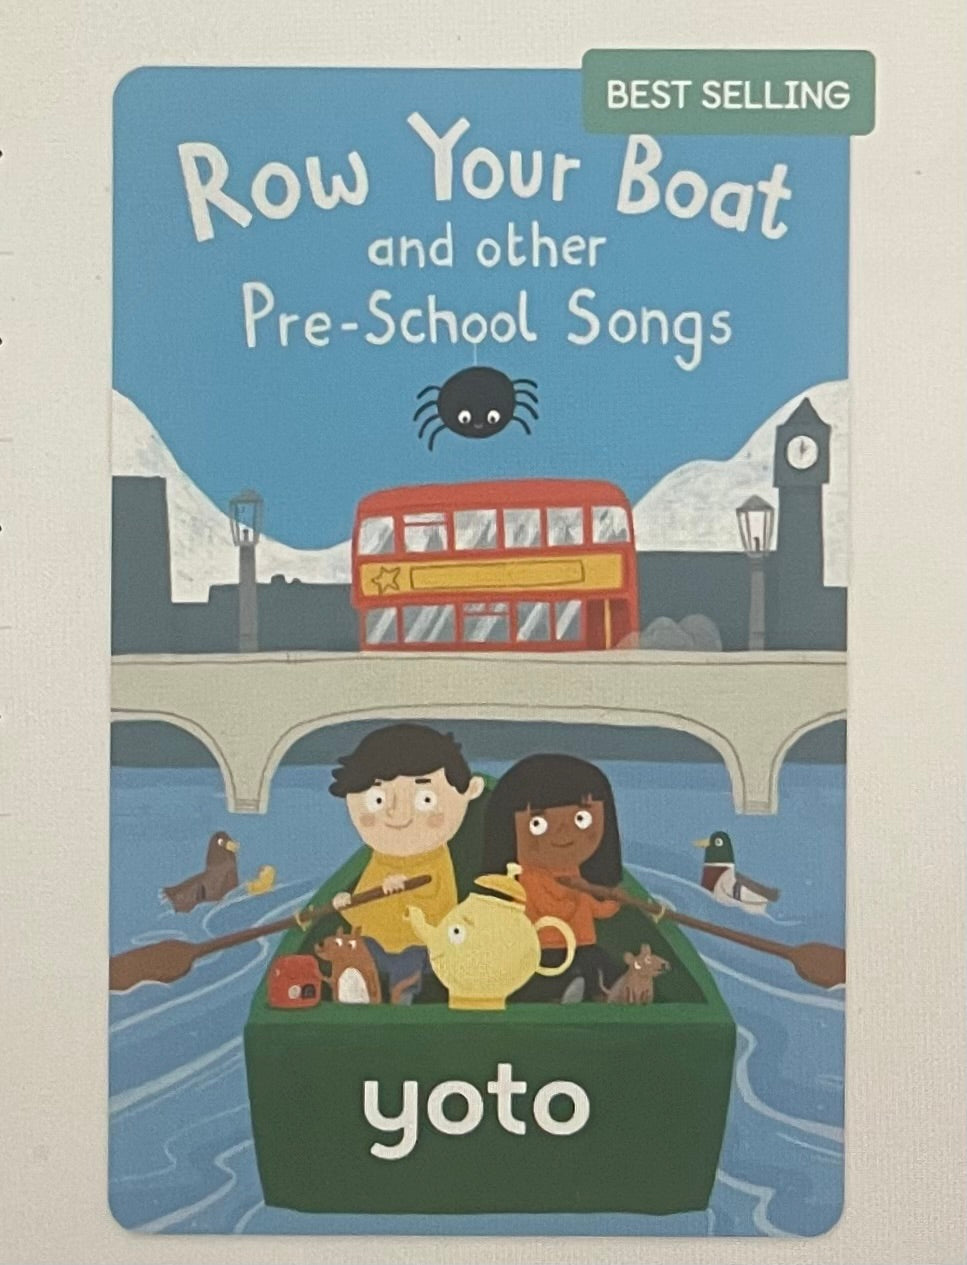 Row Your Boat and other Pre-School Songs